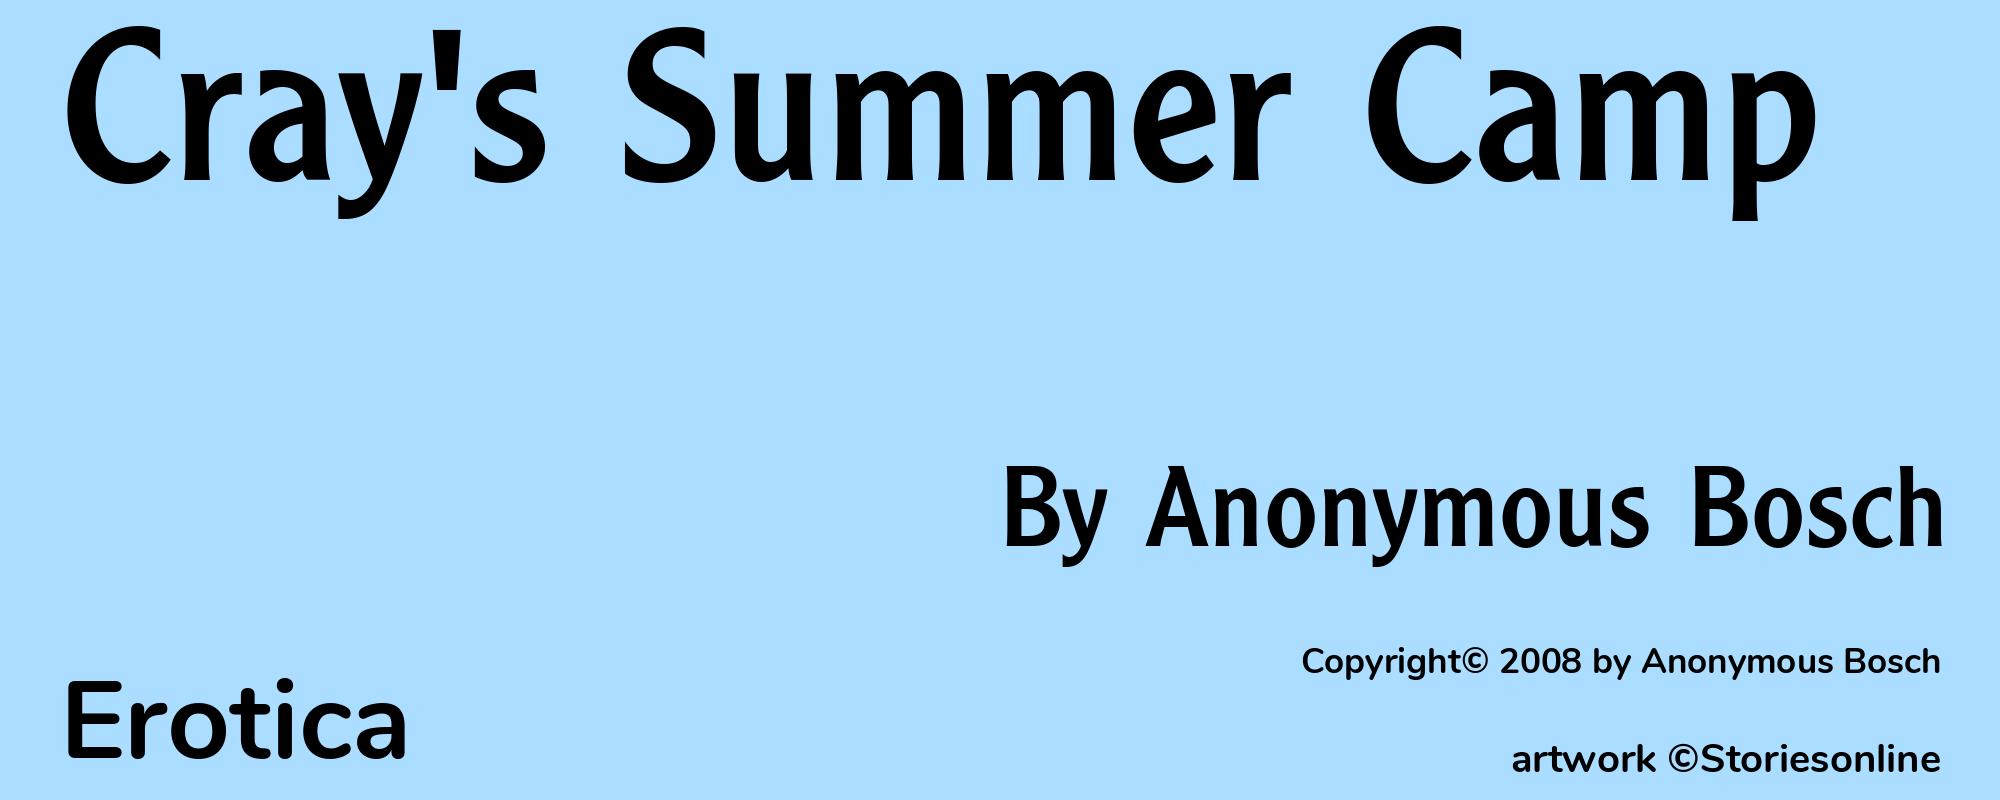 Cray's Summer Camp - Cover